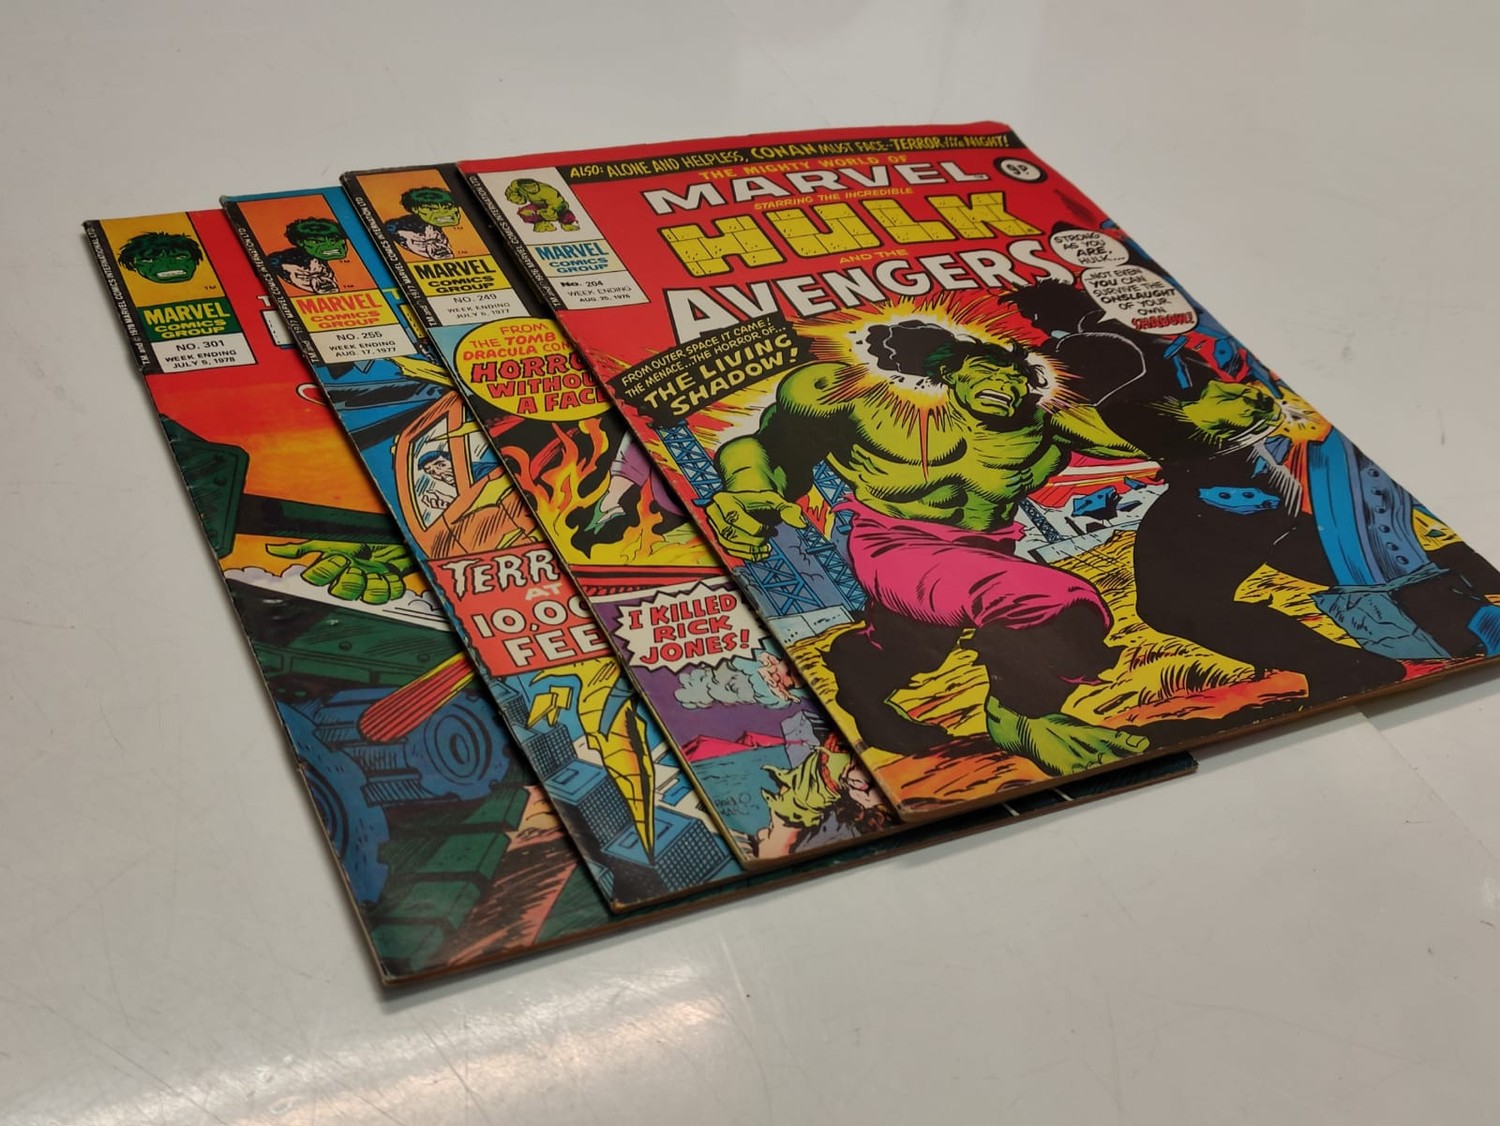 4 x Marvel comics. The Mighty World of Marvel Starring the Incredible Hulk. Dating from 1976 - 1978. - Image 4 of 6